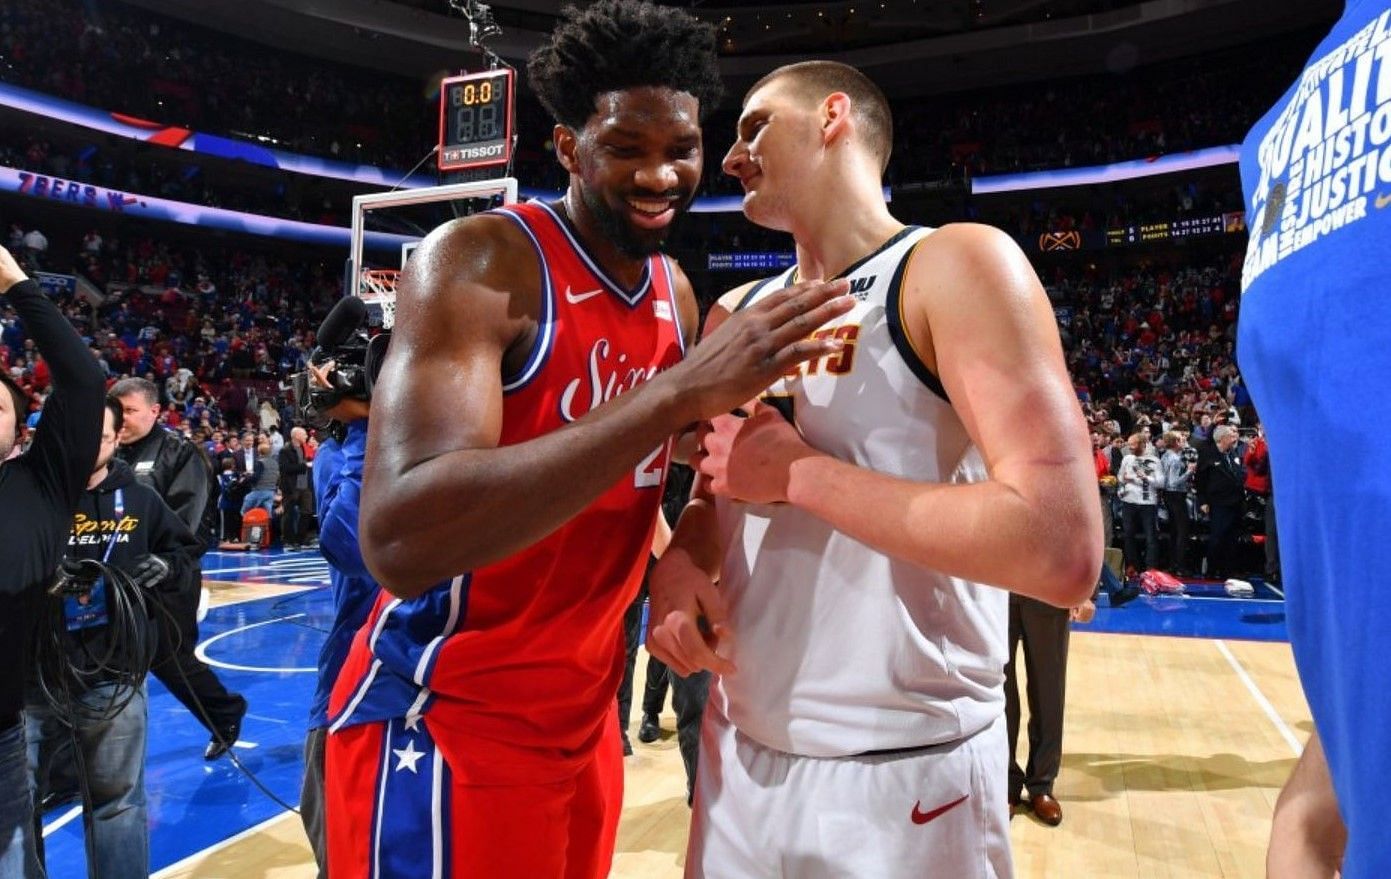 Joel Embiid was a late scratch for the Philadelphia 76ers against Nikola Jokic and the Denver Nuggets on Saturday.